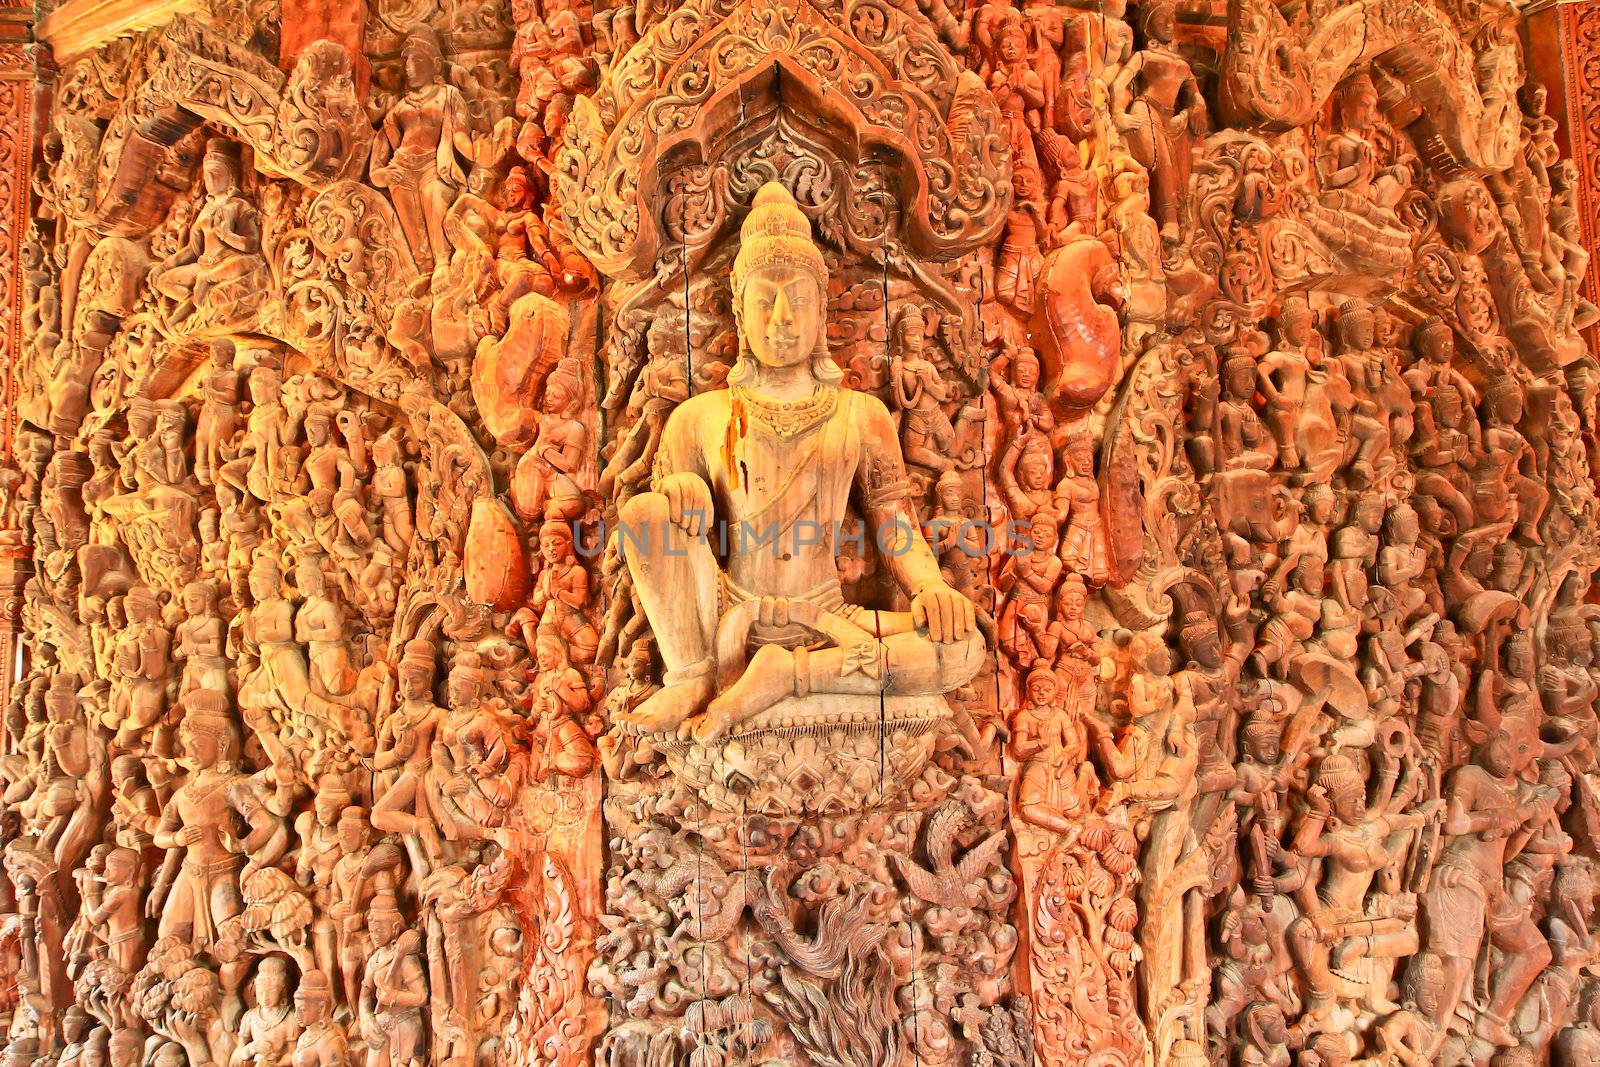 Wood carving Chonburi thailand by Photoguide